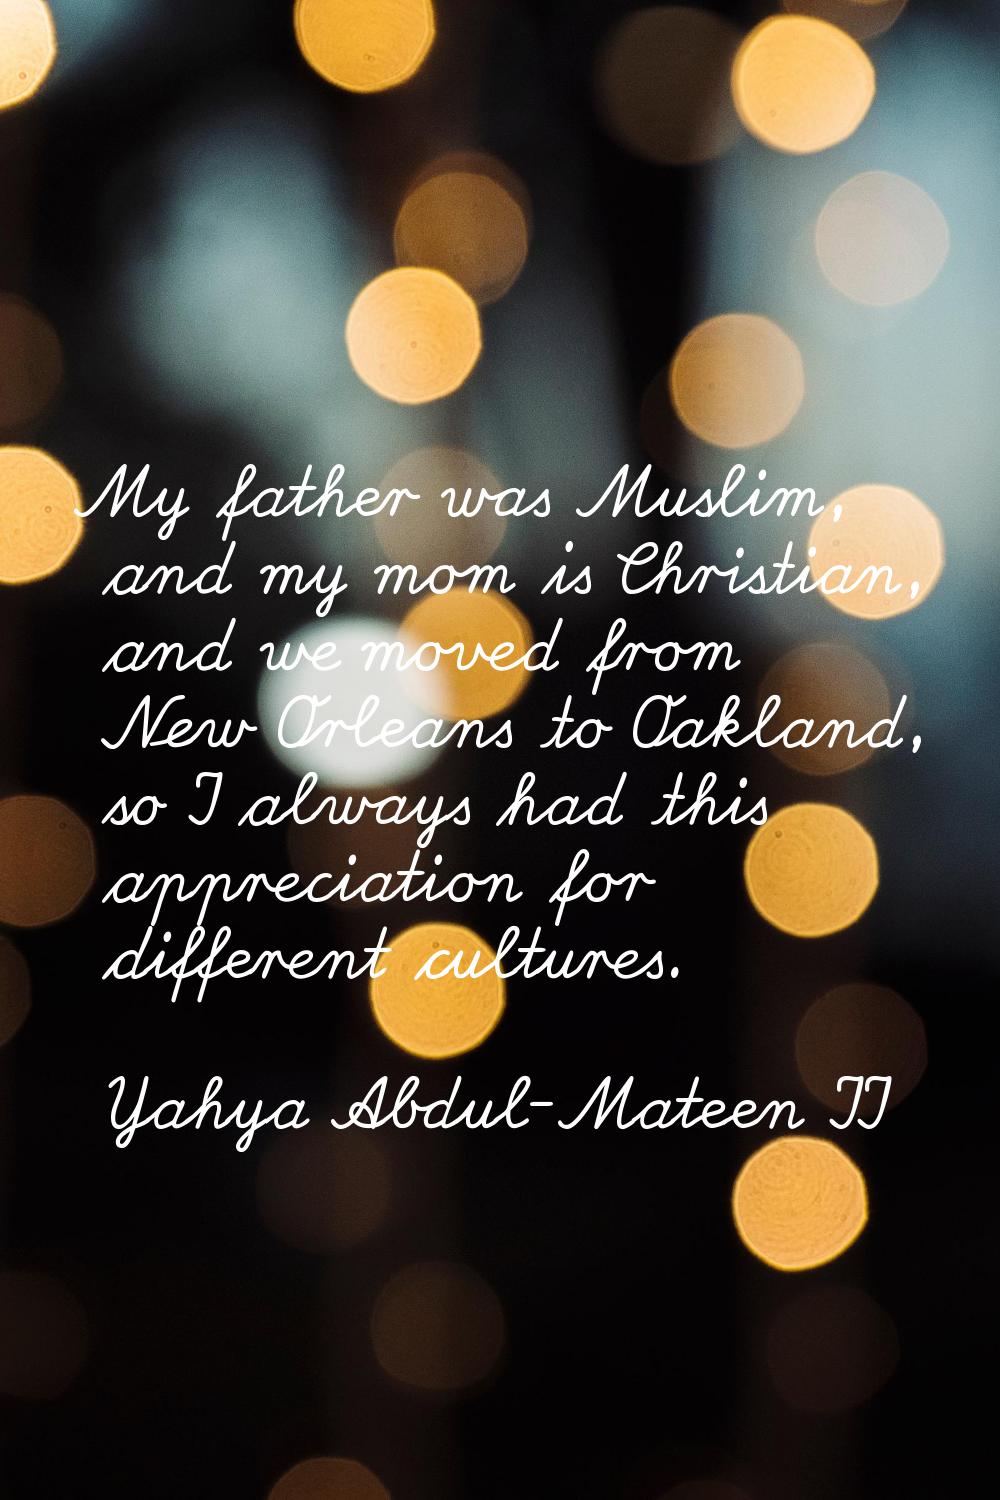 My father was Muslim, and my mom is Christian, and we moved from New Orleans to Oakland, so I alway